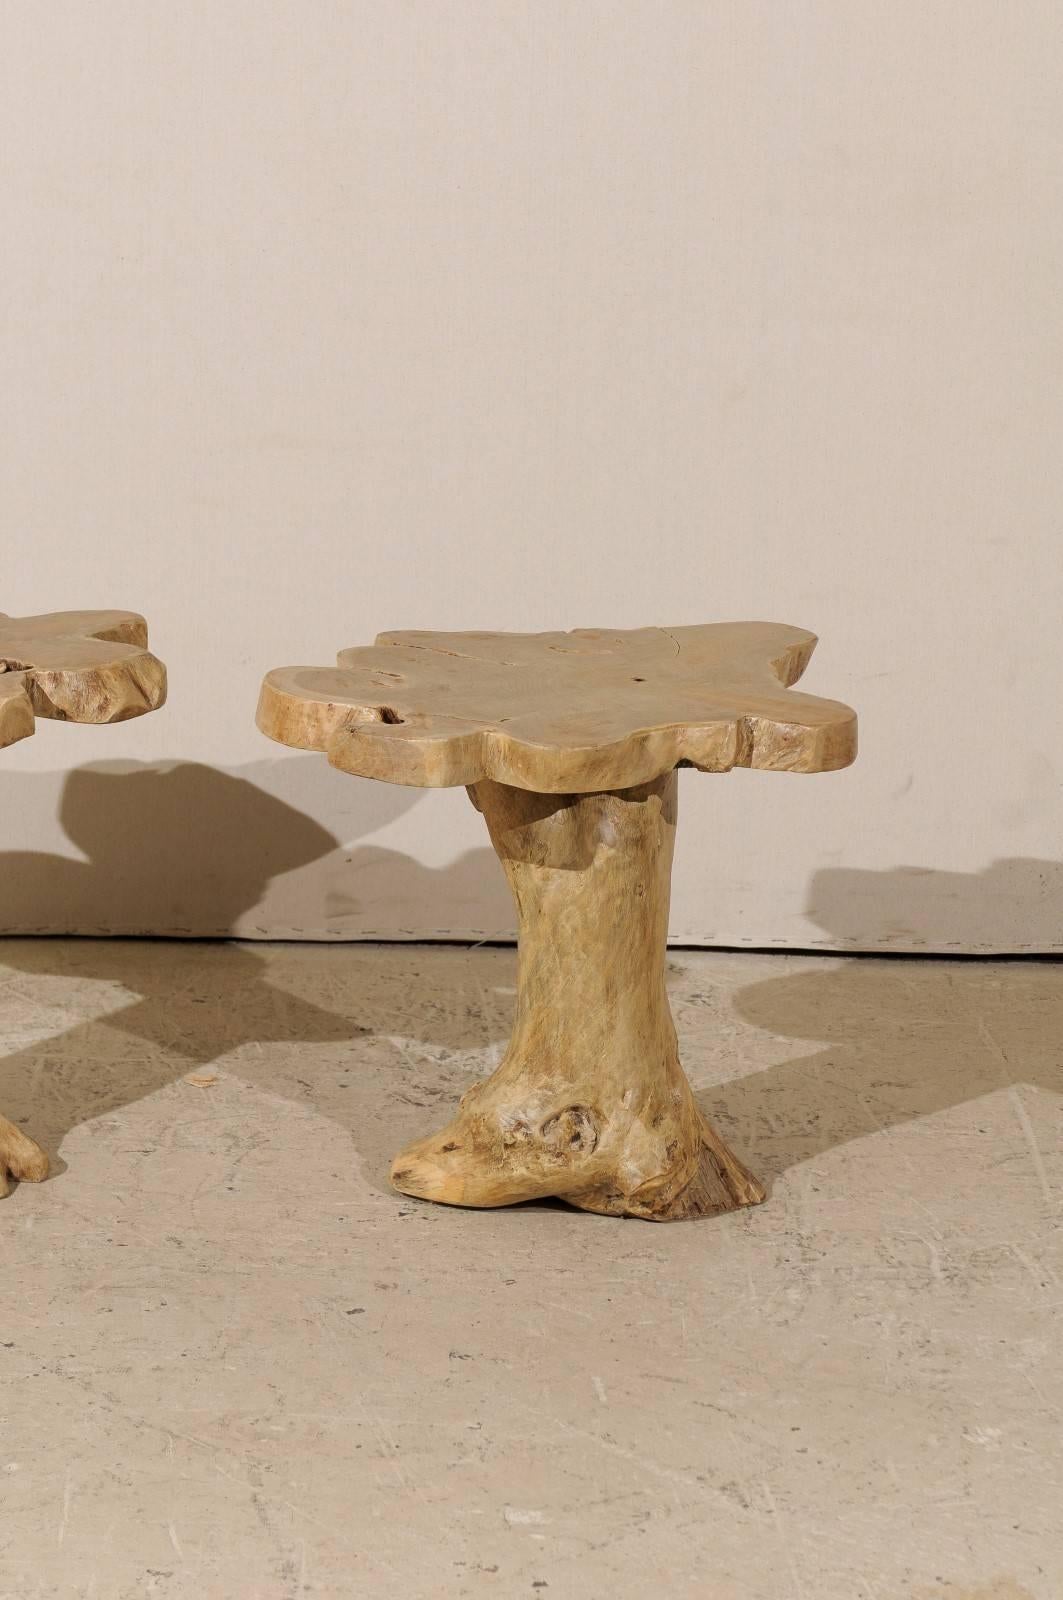 Pair of Teak Root Drink or Side Tables with Natural Finish from India, Tan Color 1